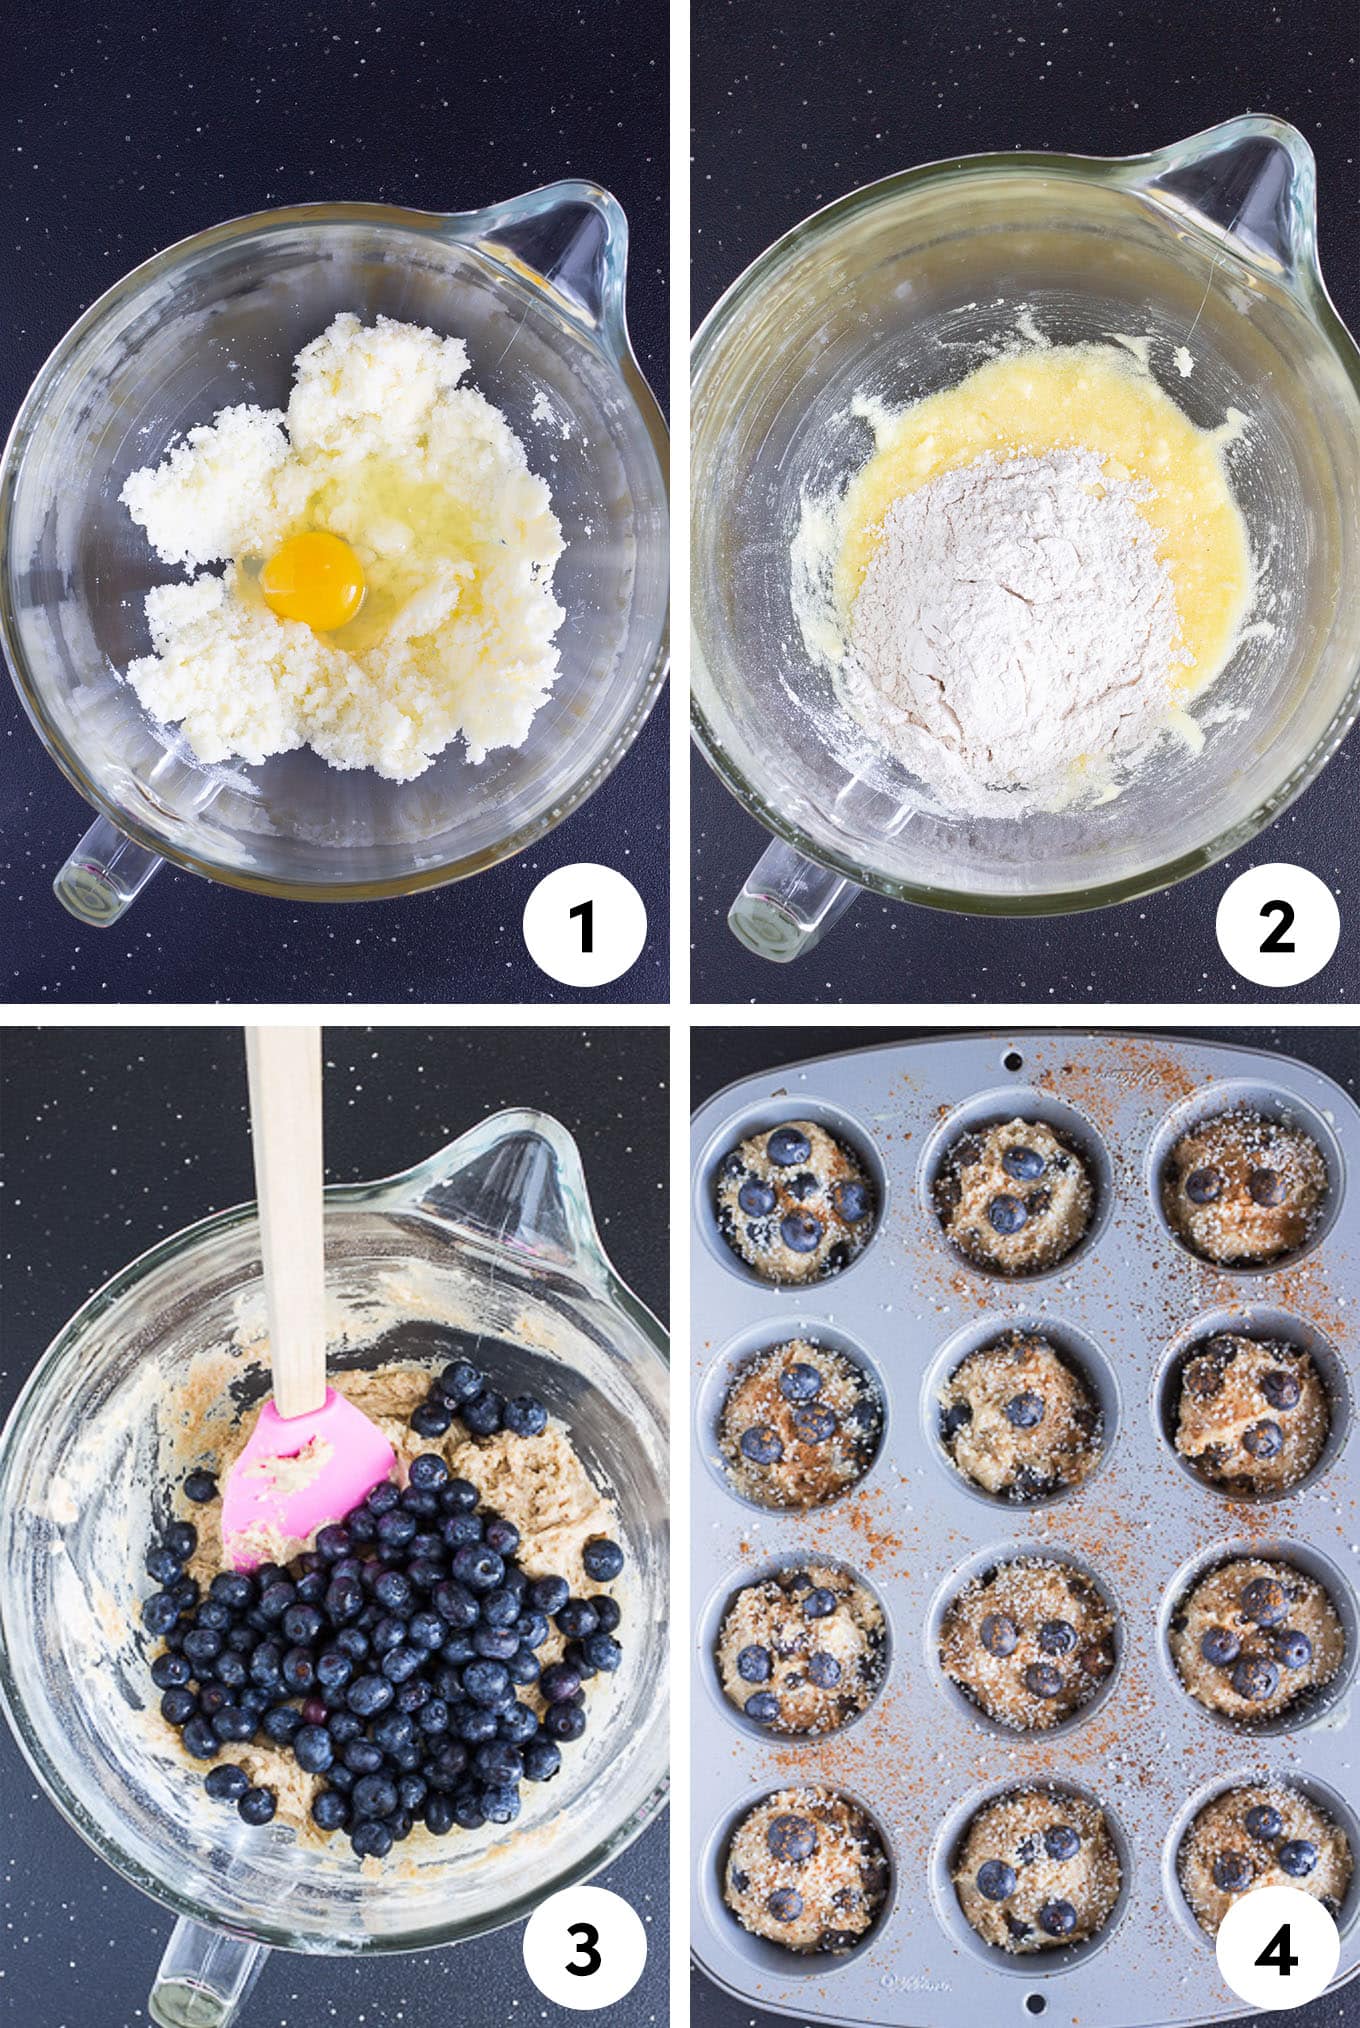 A collage of images showing mixing the blueberry muffins and placing them in a pan.